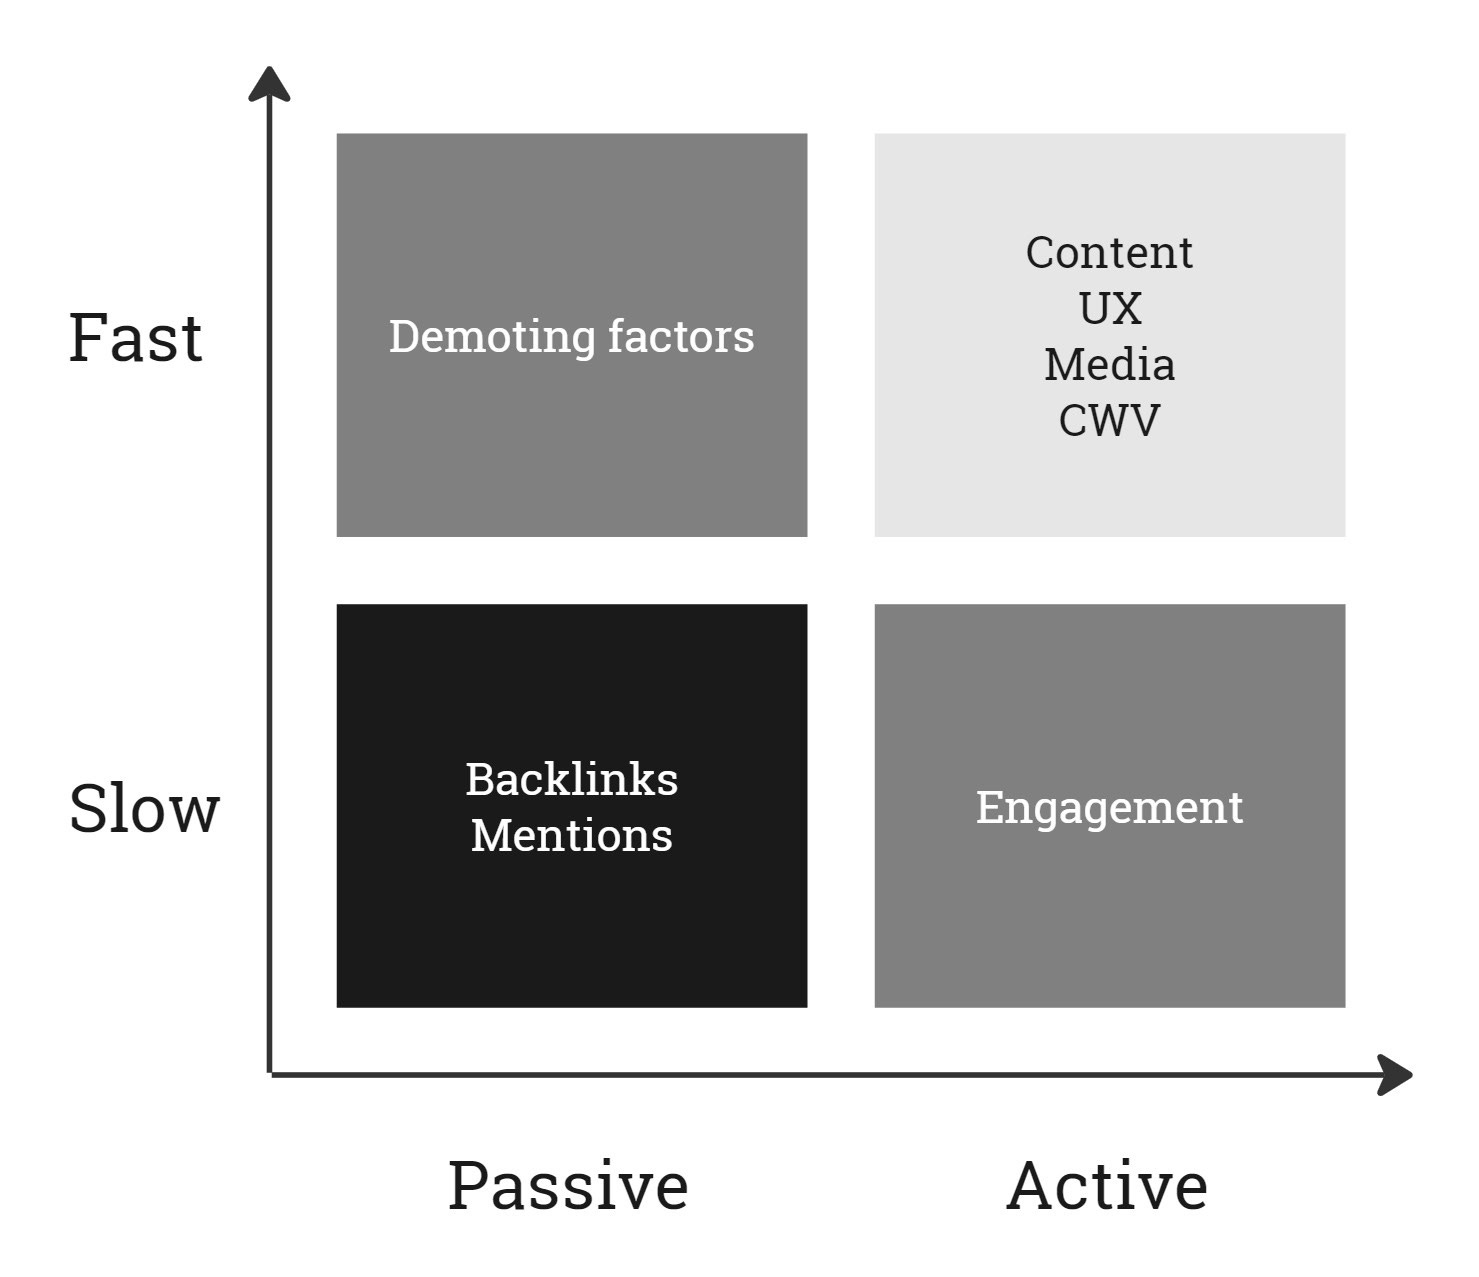 A 2x2 grid with axes labeled "Fast" to "Slow" on the y-axis and "Passive" to "Active" on the x-axis, reflecting Google's Ranking Factors. 